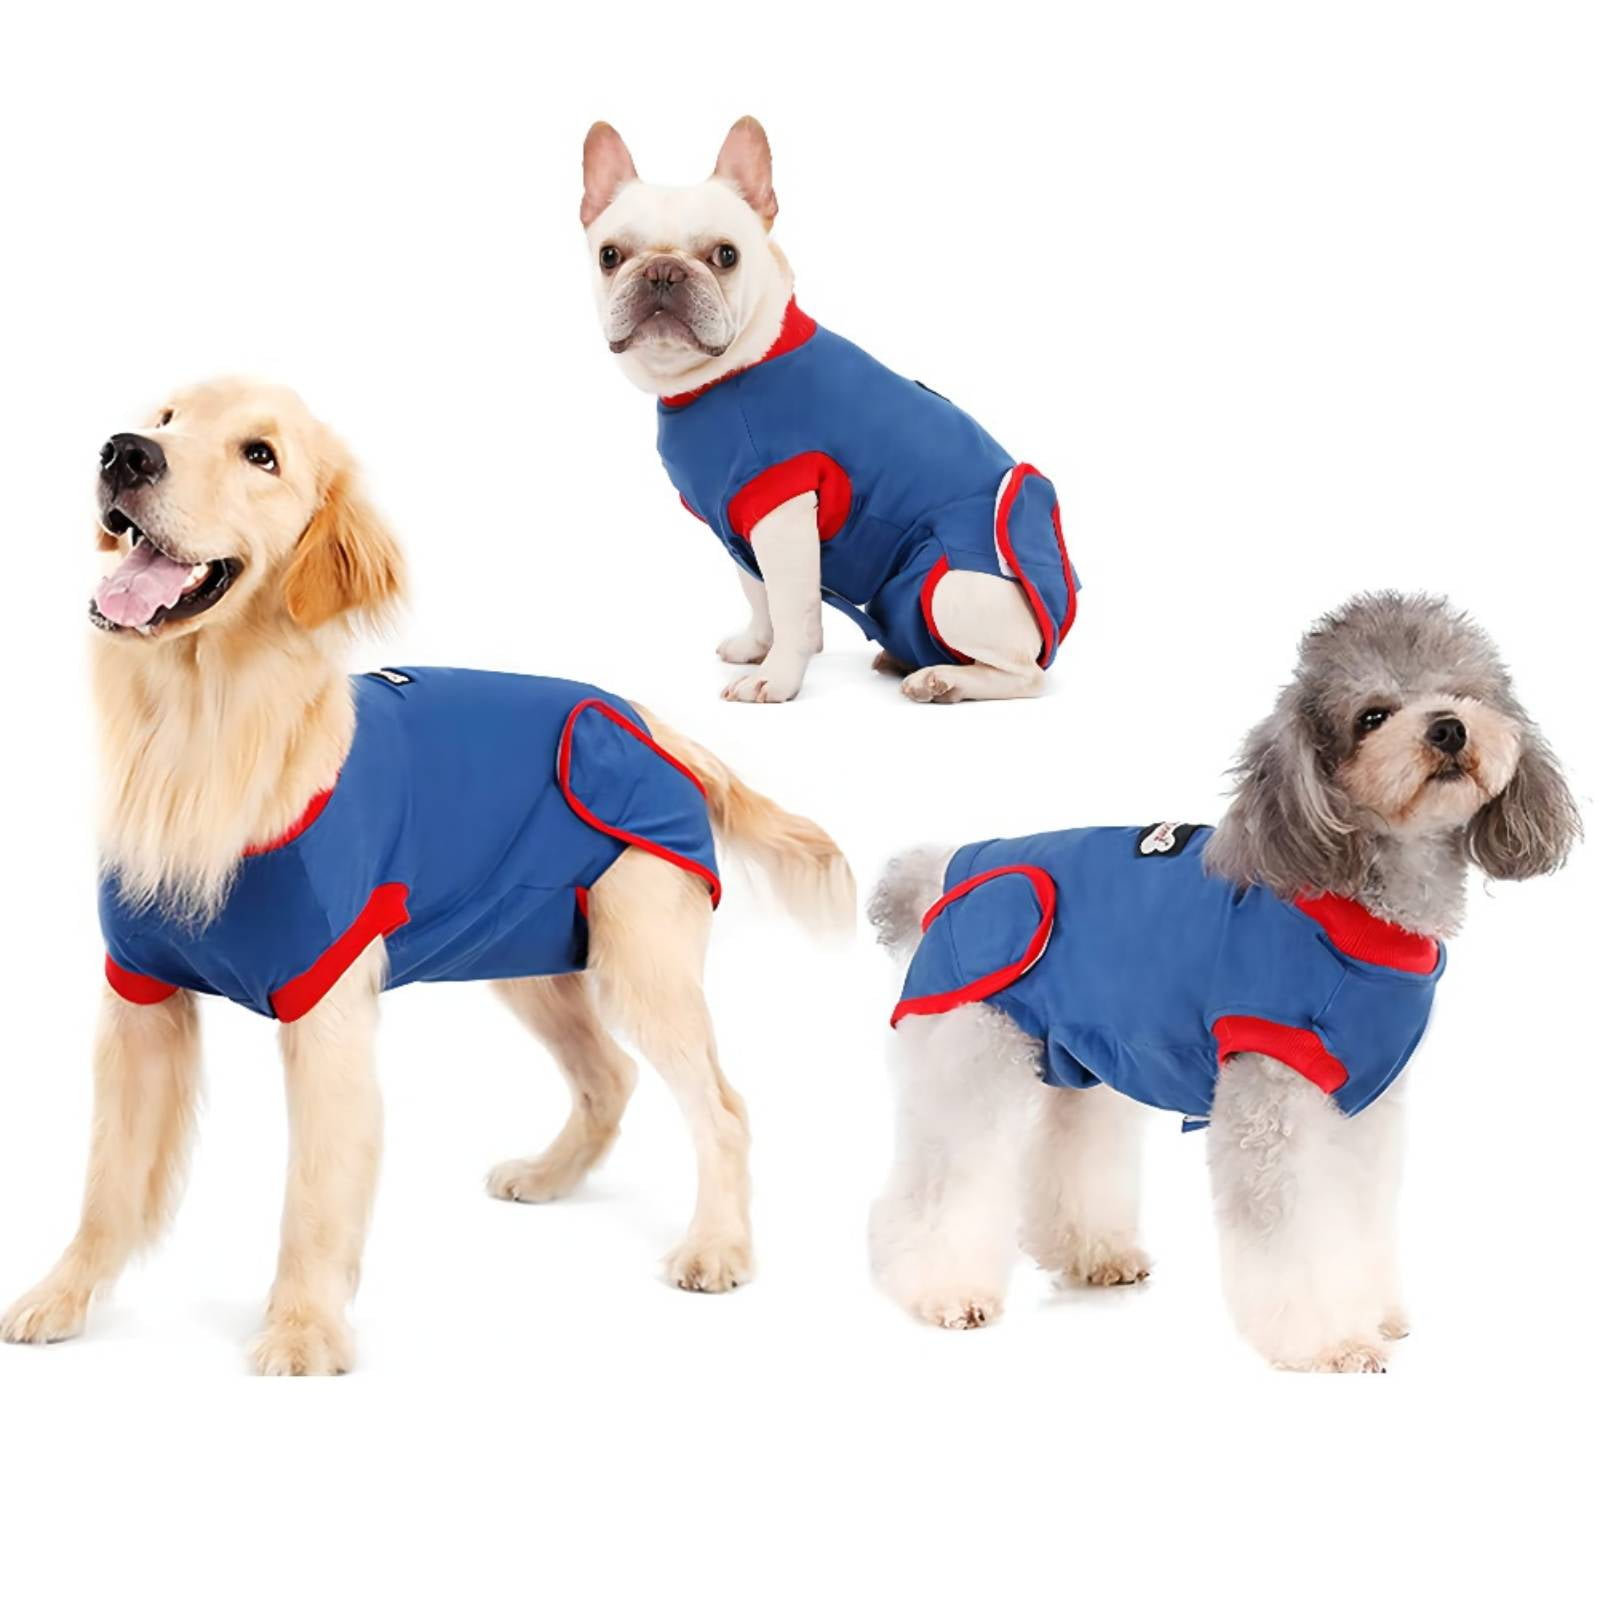 Recovery Suit for Dogs After Surgery,Male Female E-Collar Alternative Snuggly Recovery Shirt,Neuter Surgisuit Vest,Surgical Pet Wear Clothing for Abdominal Wounds Anti-Licking Post Op Bodysuits 